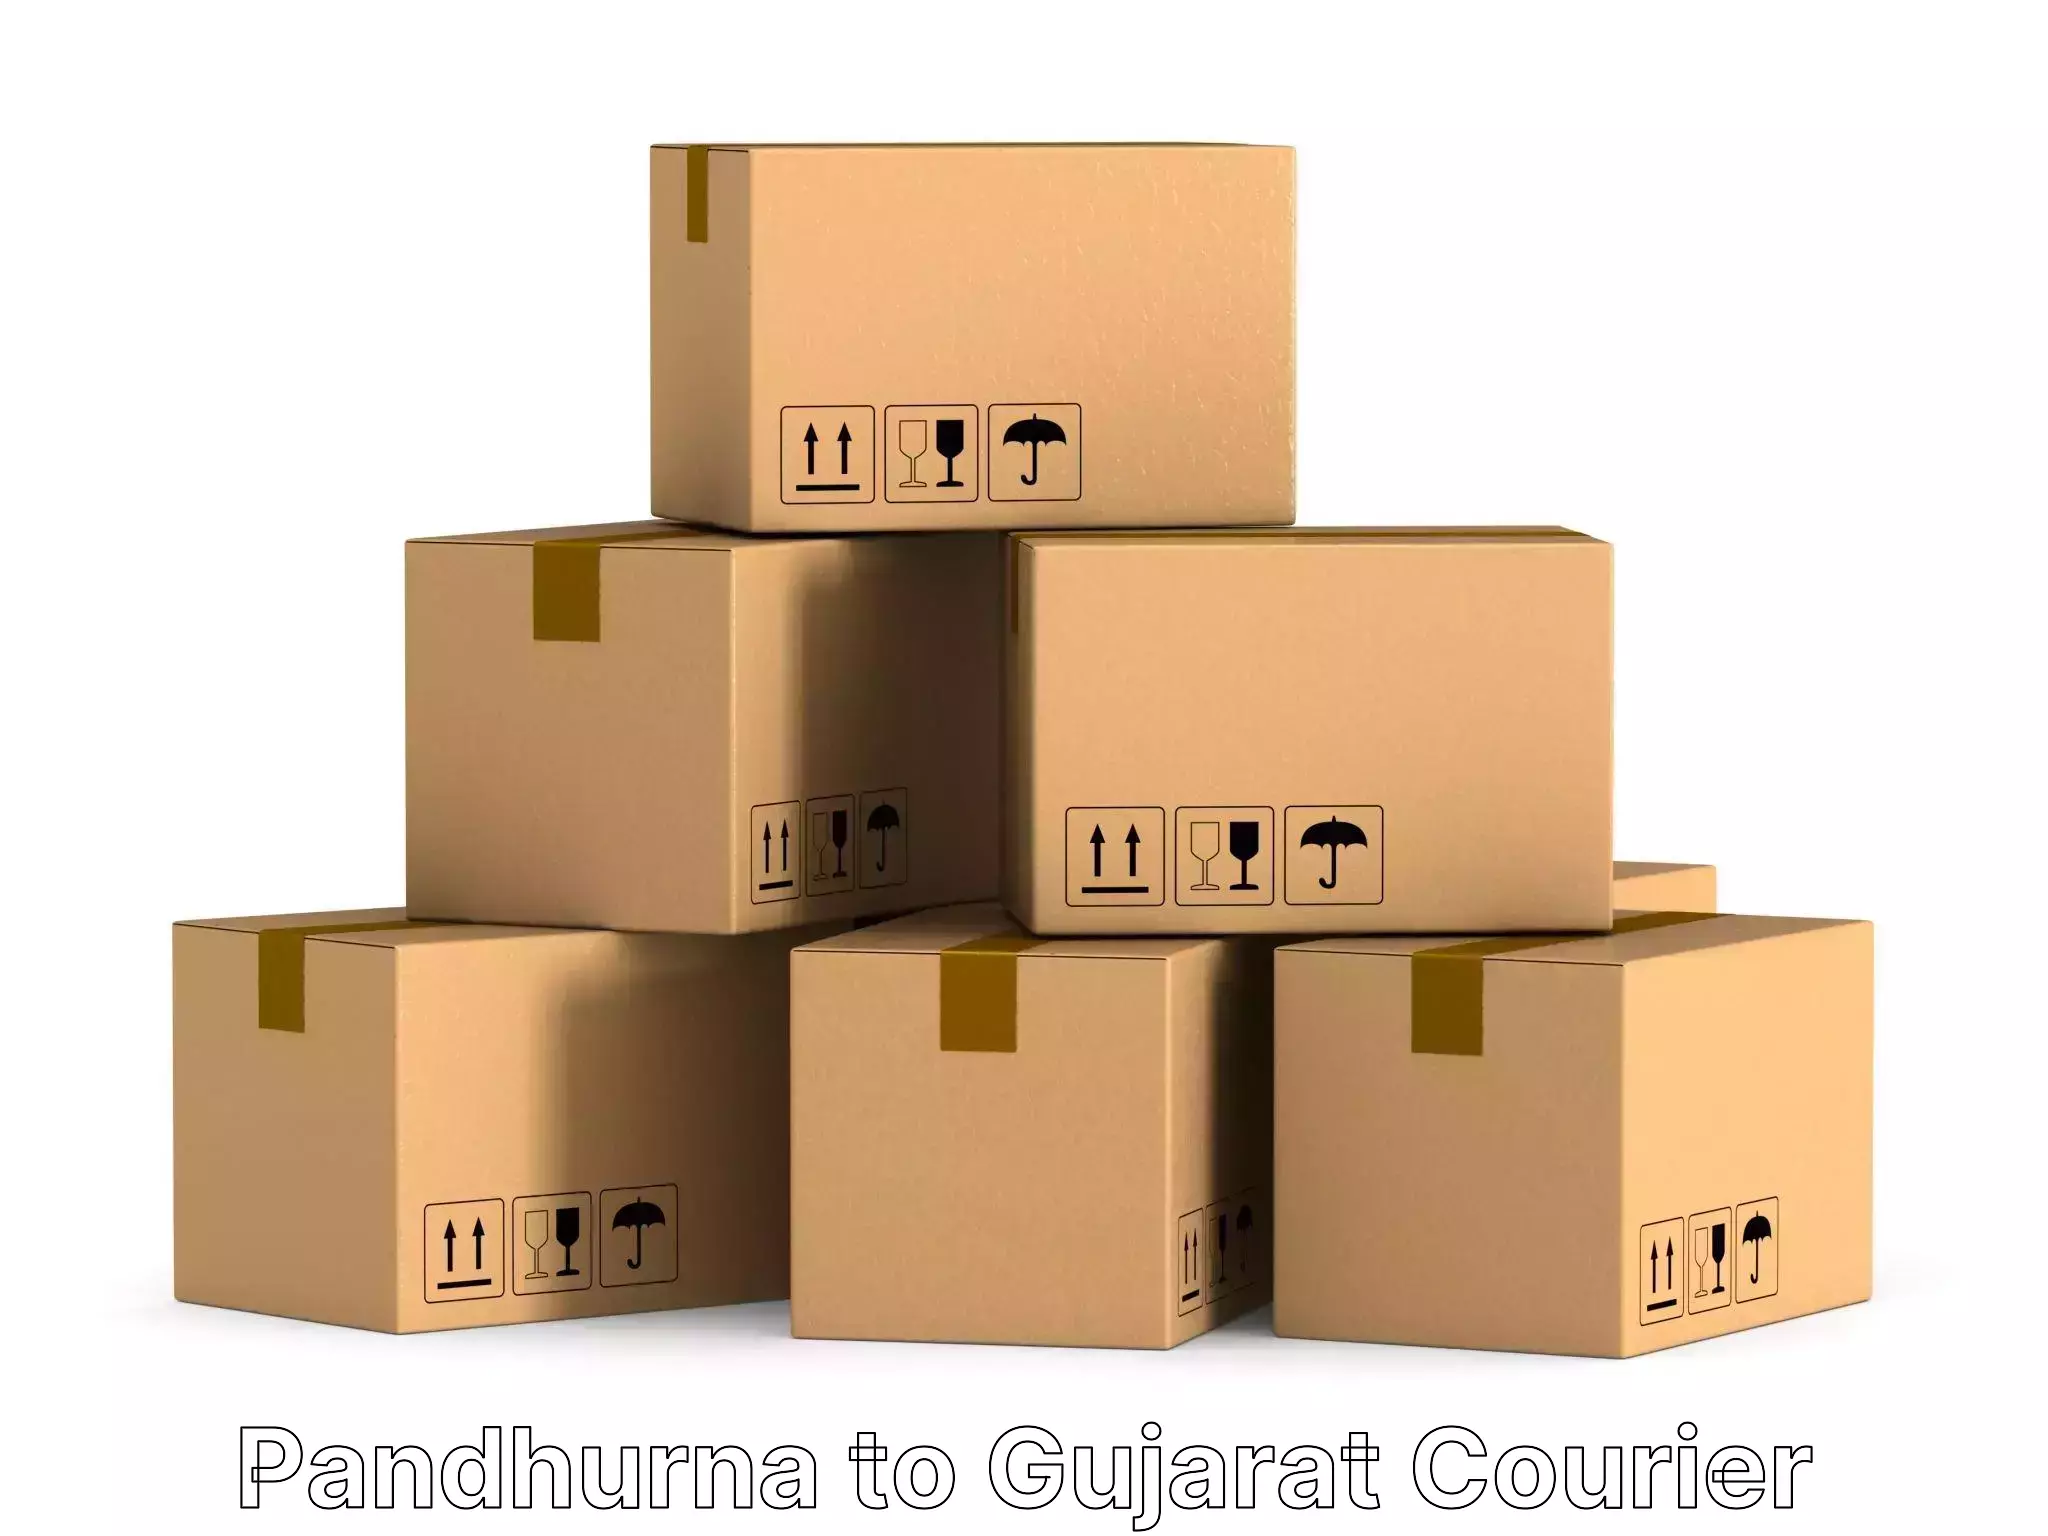 Professional moving assistance Pandhurna to Prantij